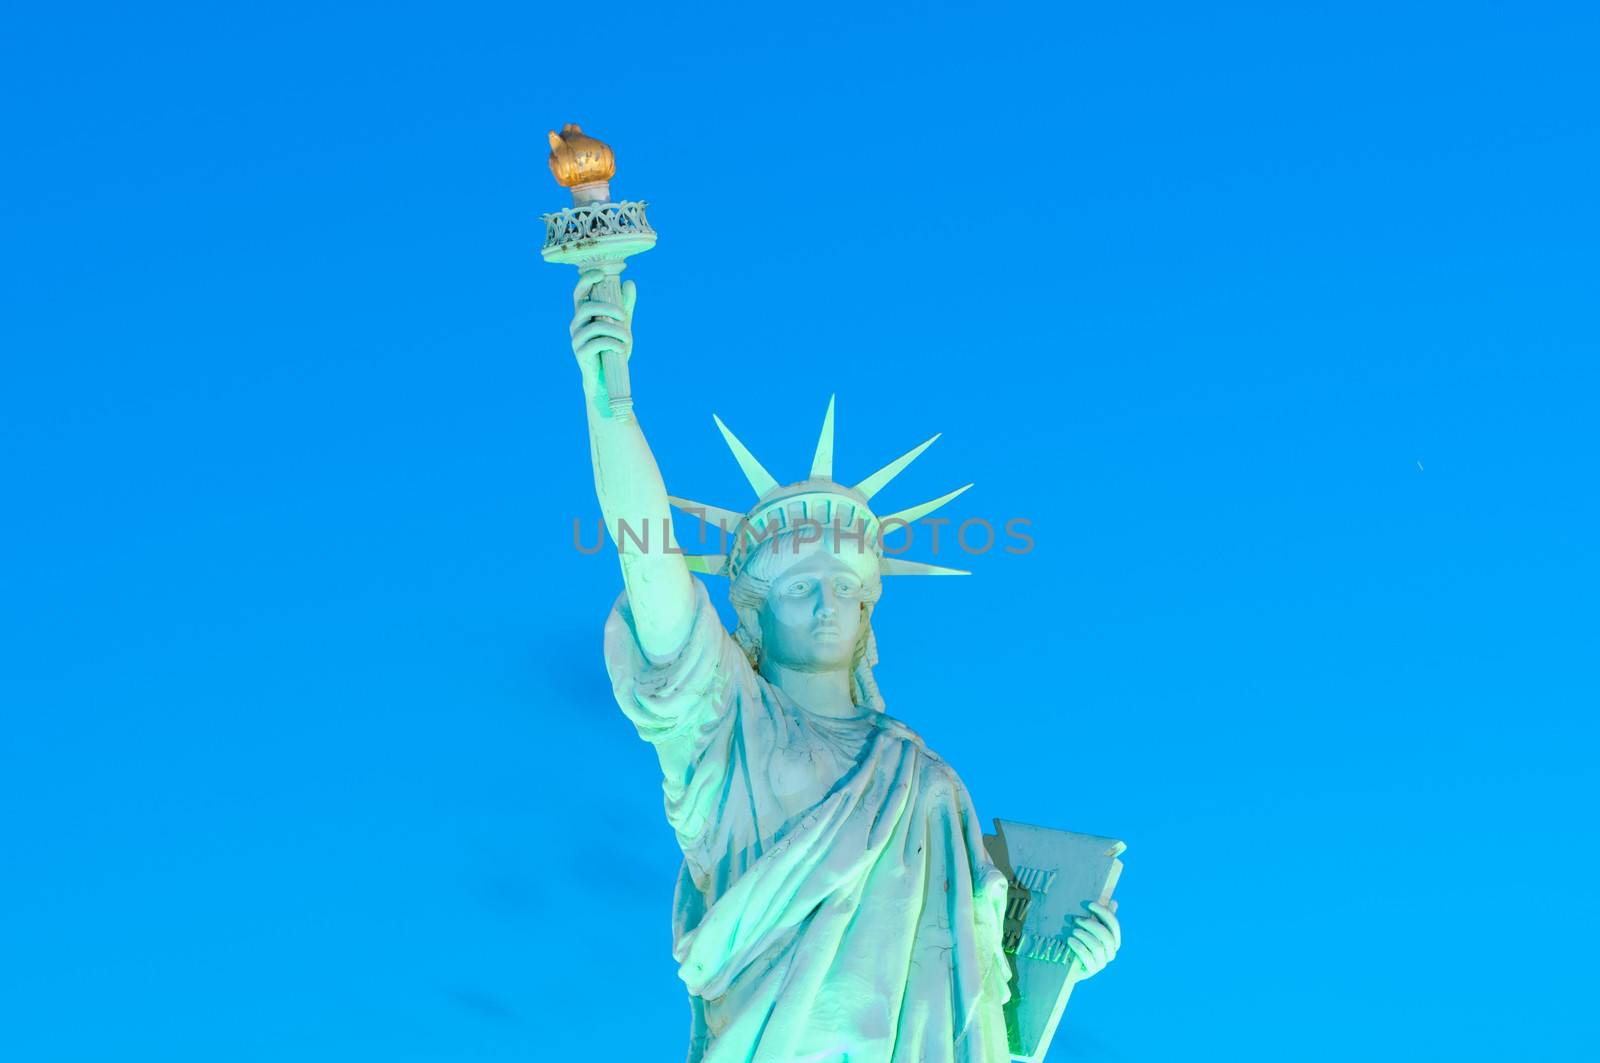 statue of liberty is reproduced to mini size in mini siam, Thailand.